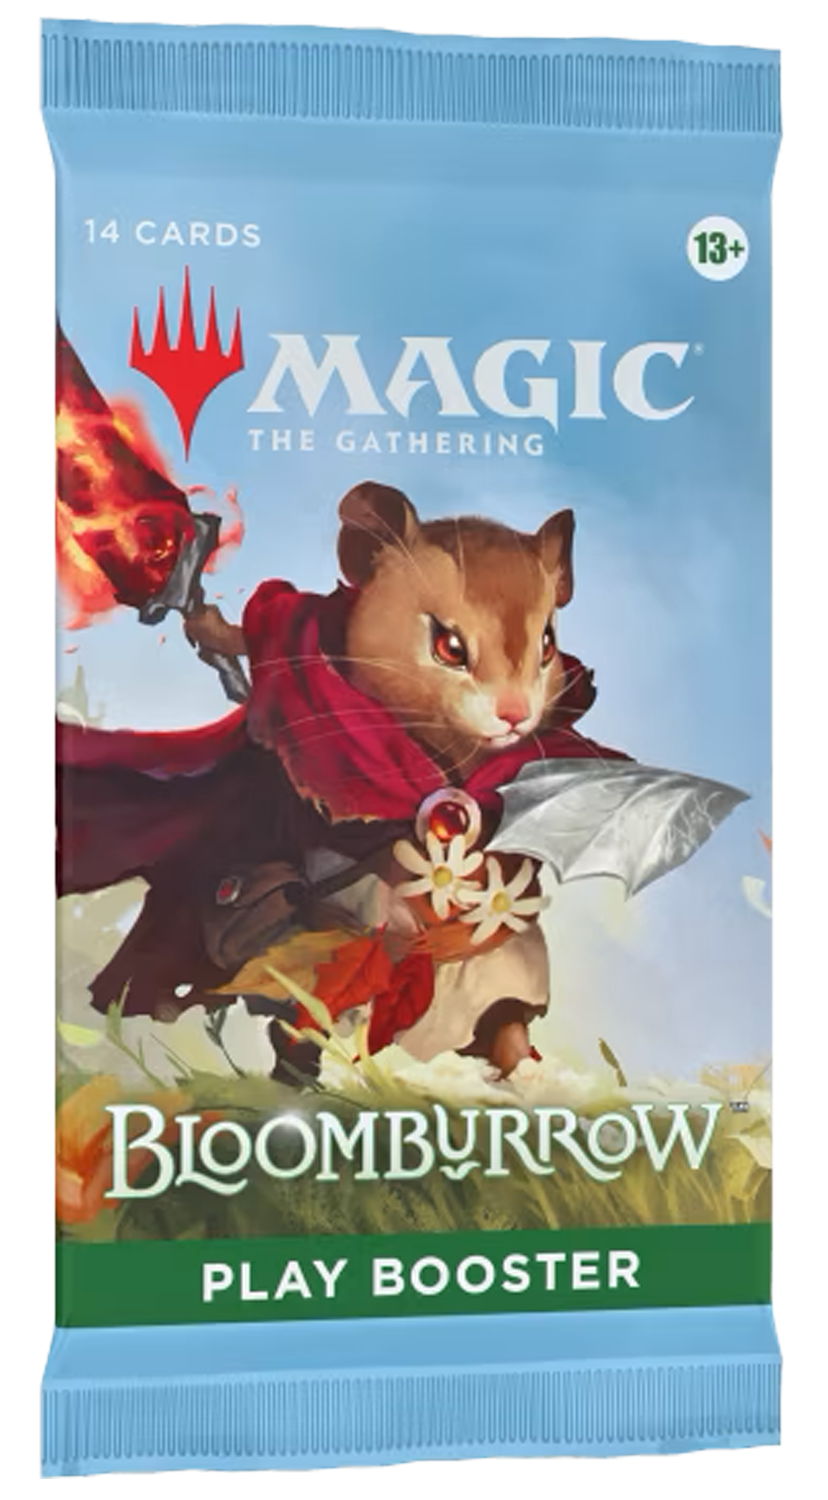 Bloomburrow Play Booster Display - Magic the Gathering - EN